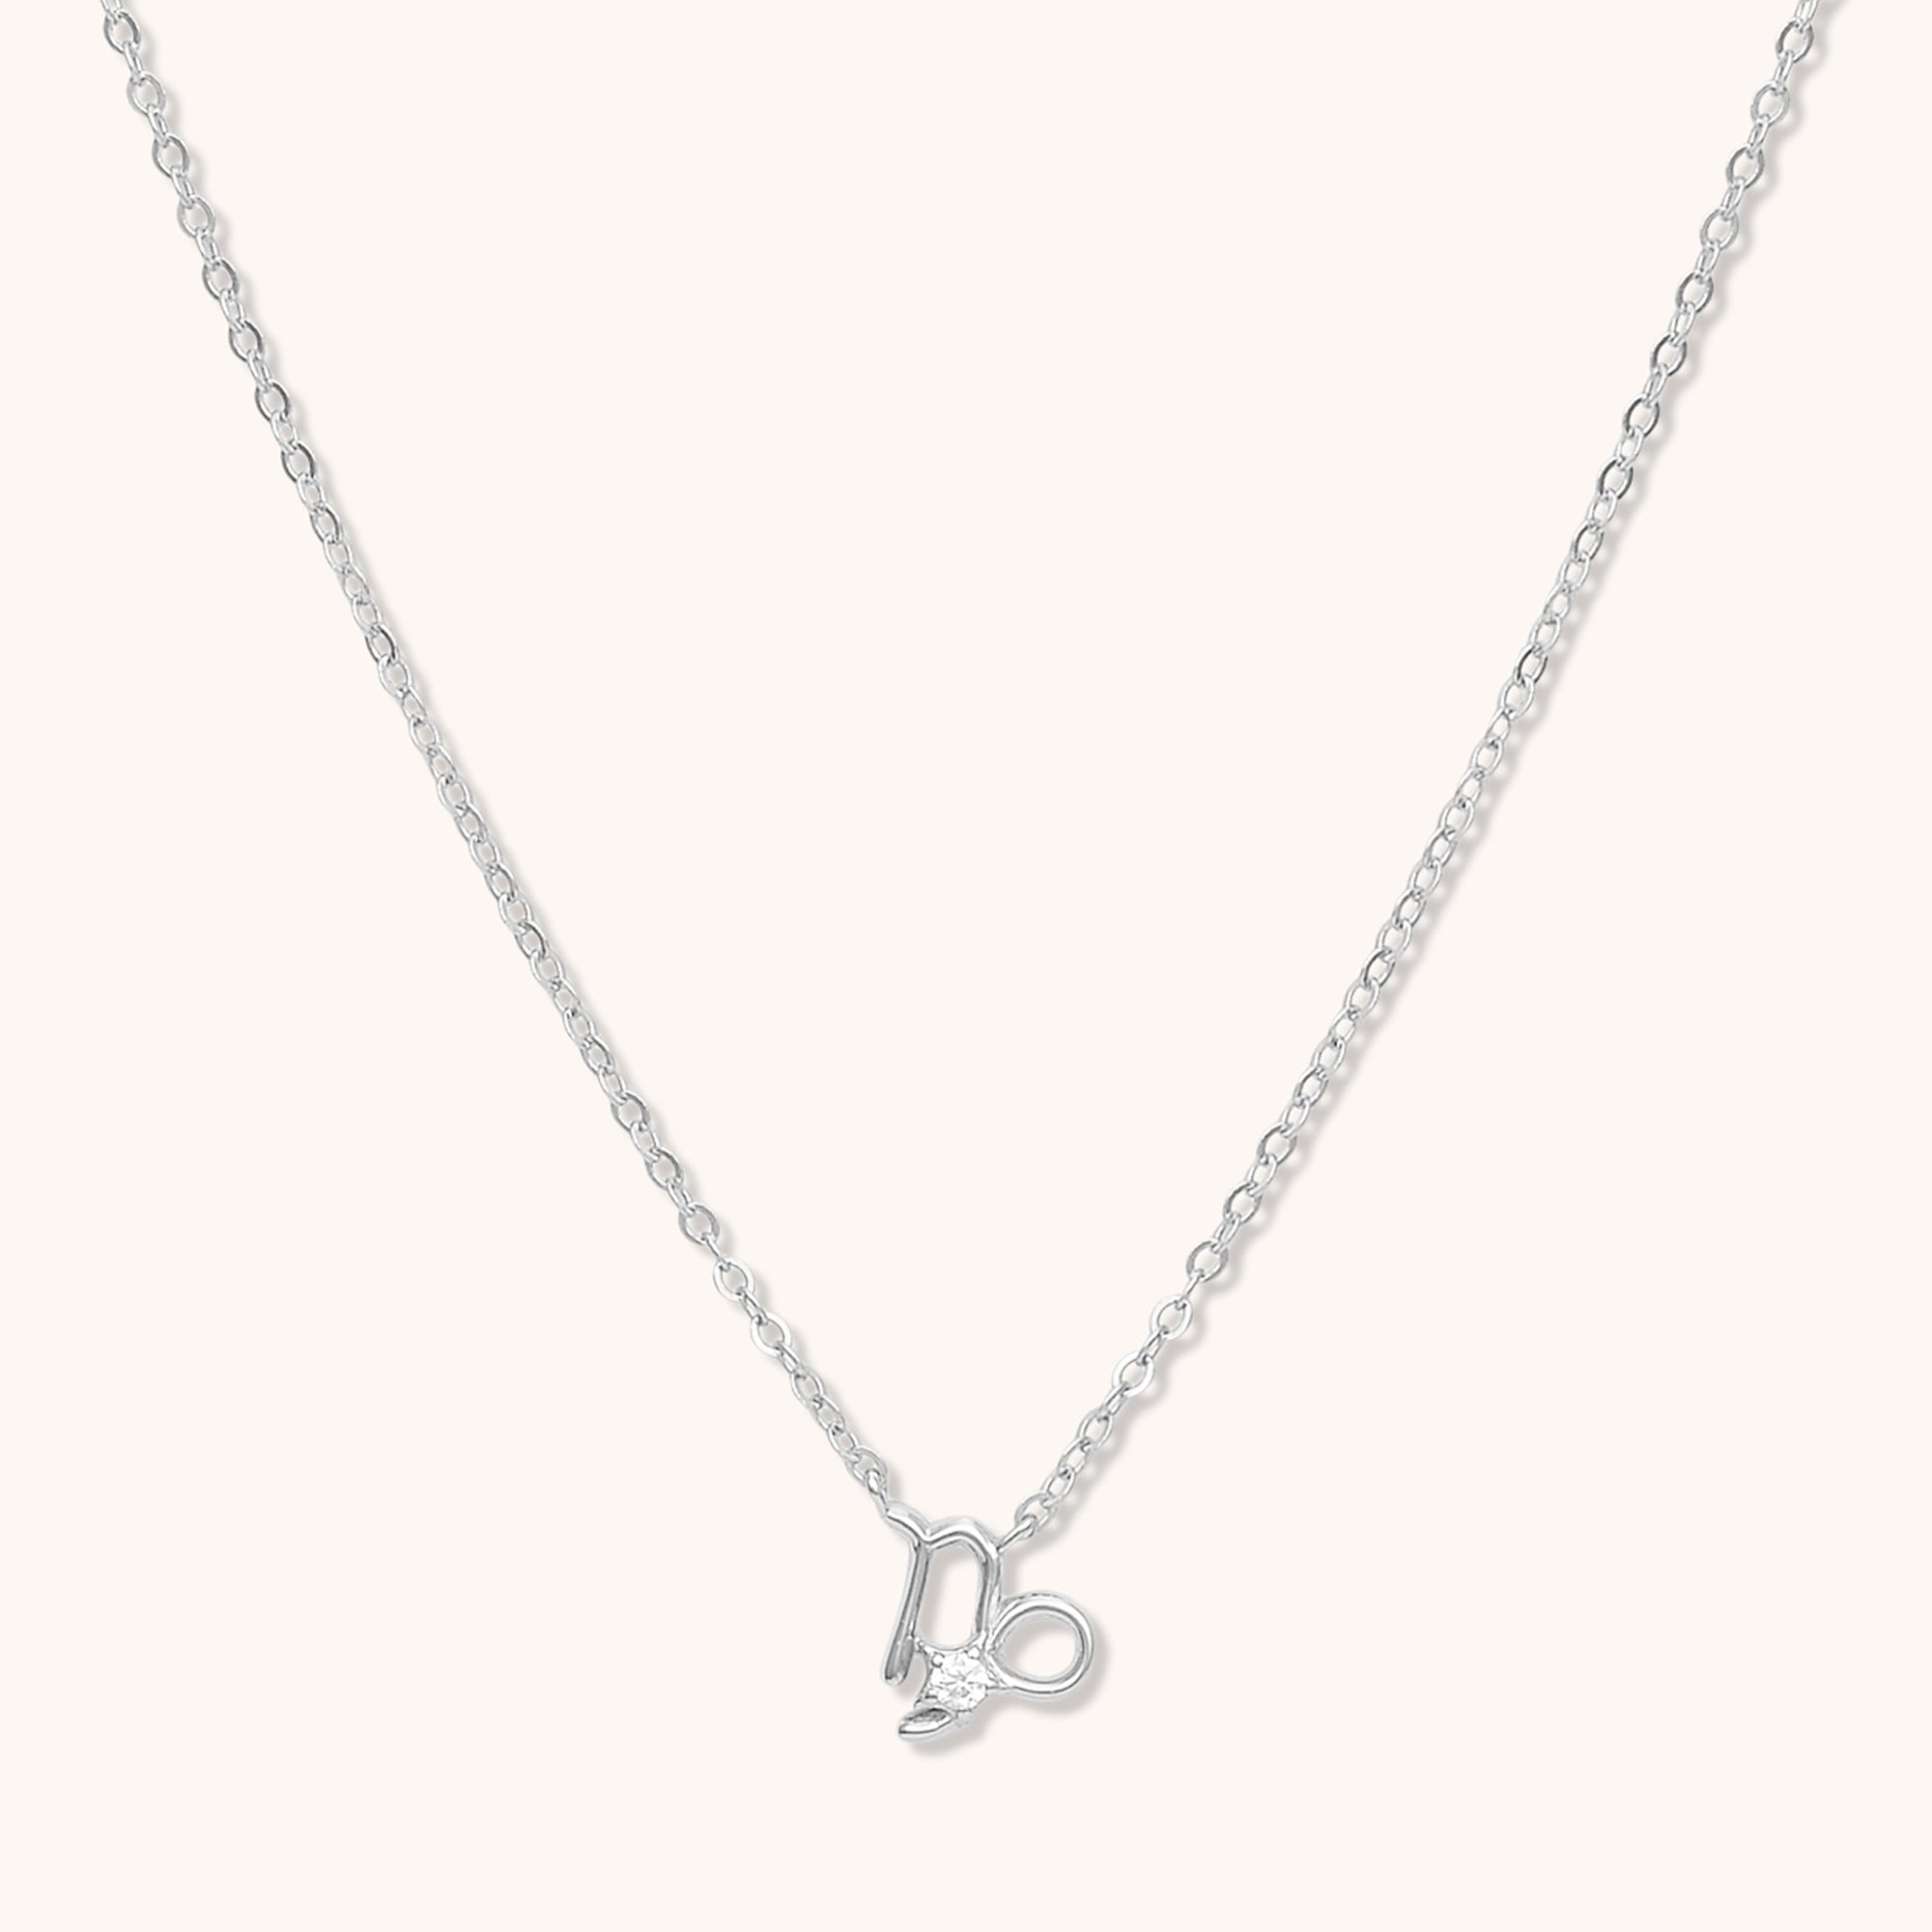 Capricorn Star Sign Necklace Silver